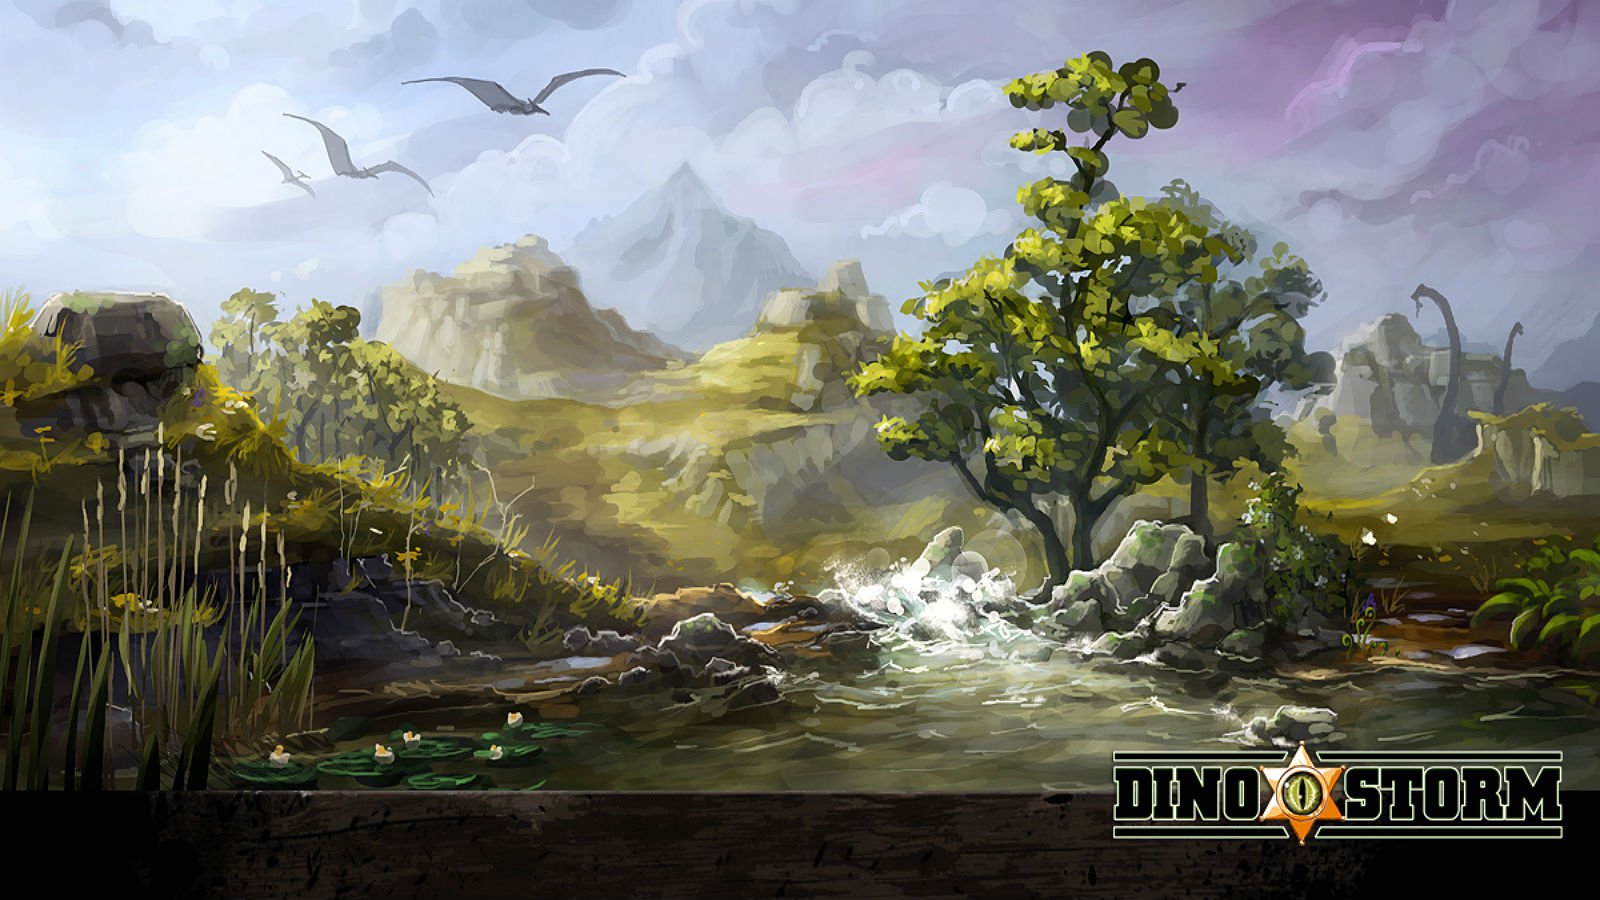 dino, Storm, Dinosaur, Fantasy, Mmo, Online, Monster, Creature, 1dinos, Action, Adventure, Cowboty, Western, Shooter, Poster Wallpaper